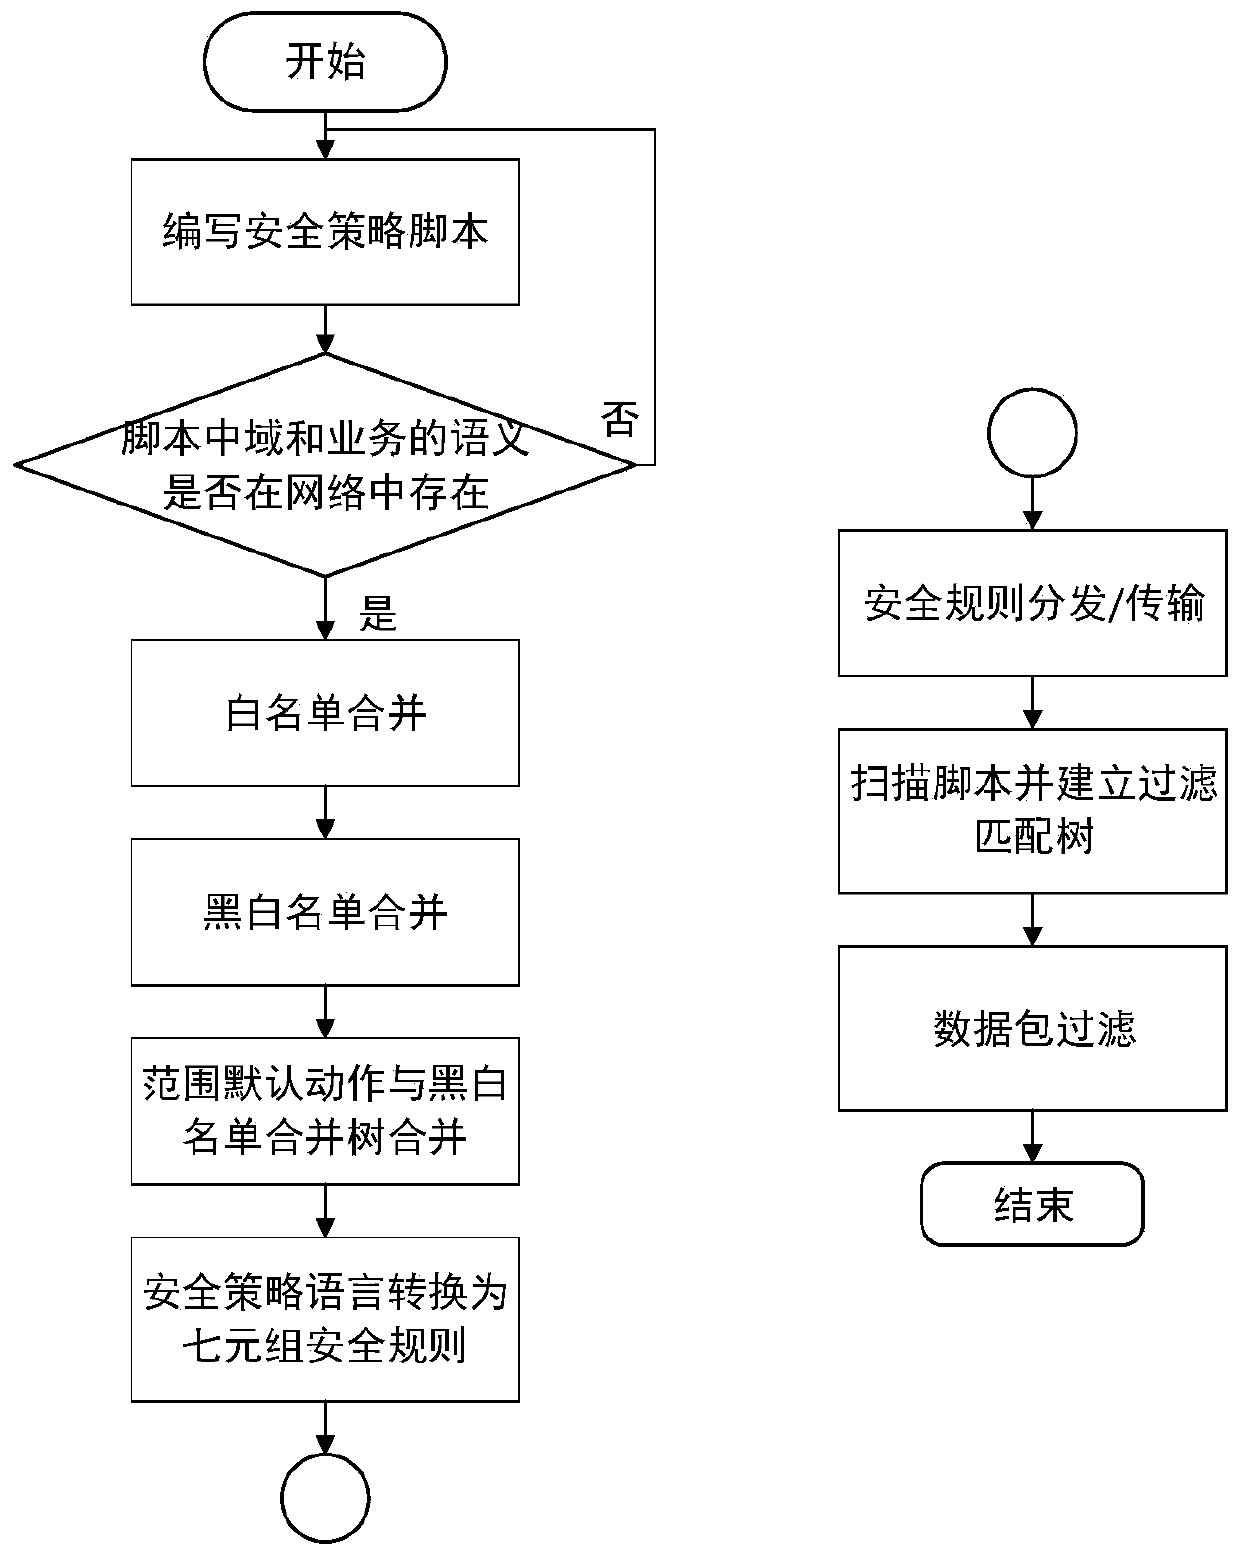 Rapid fine-grained multi-domain network interconnection security control method